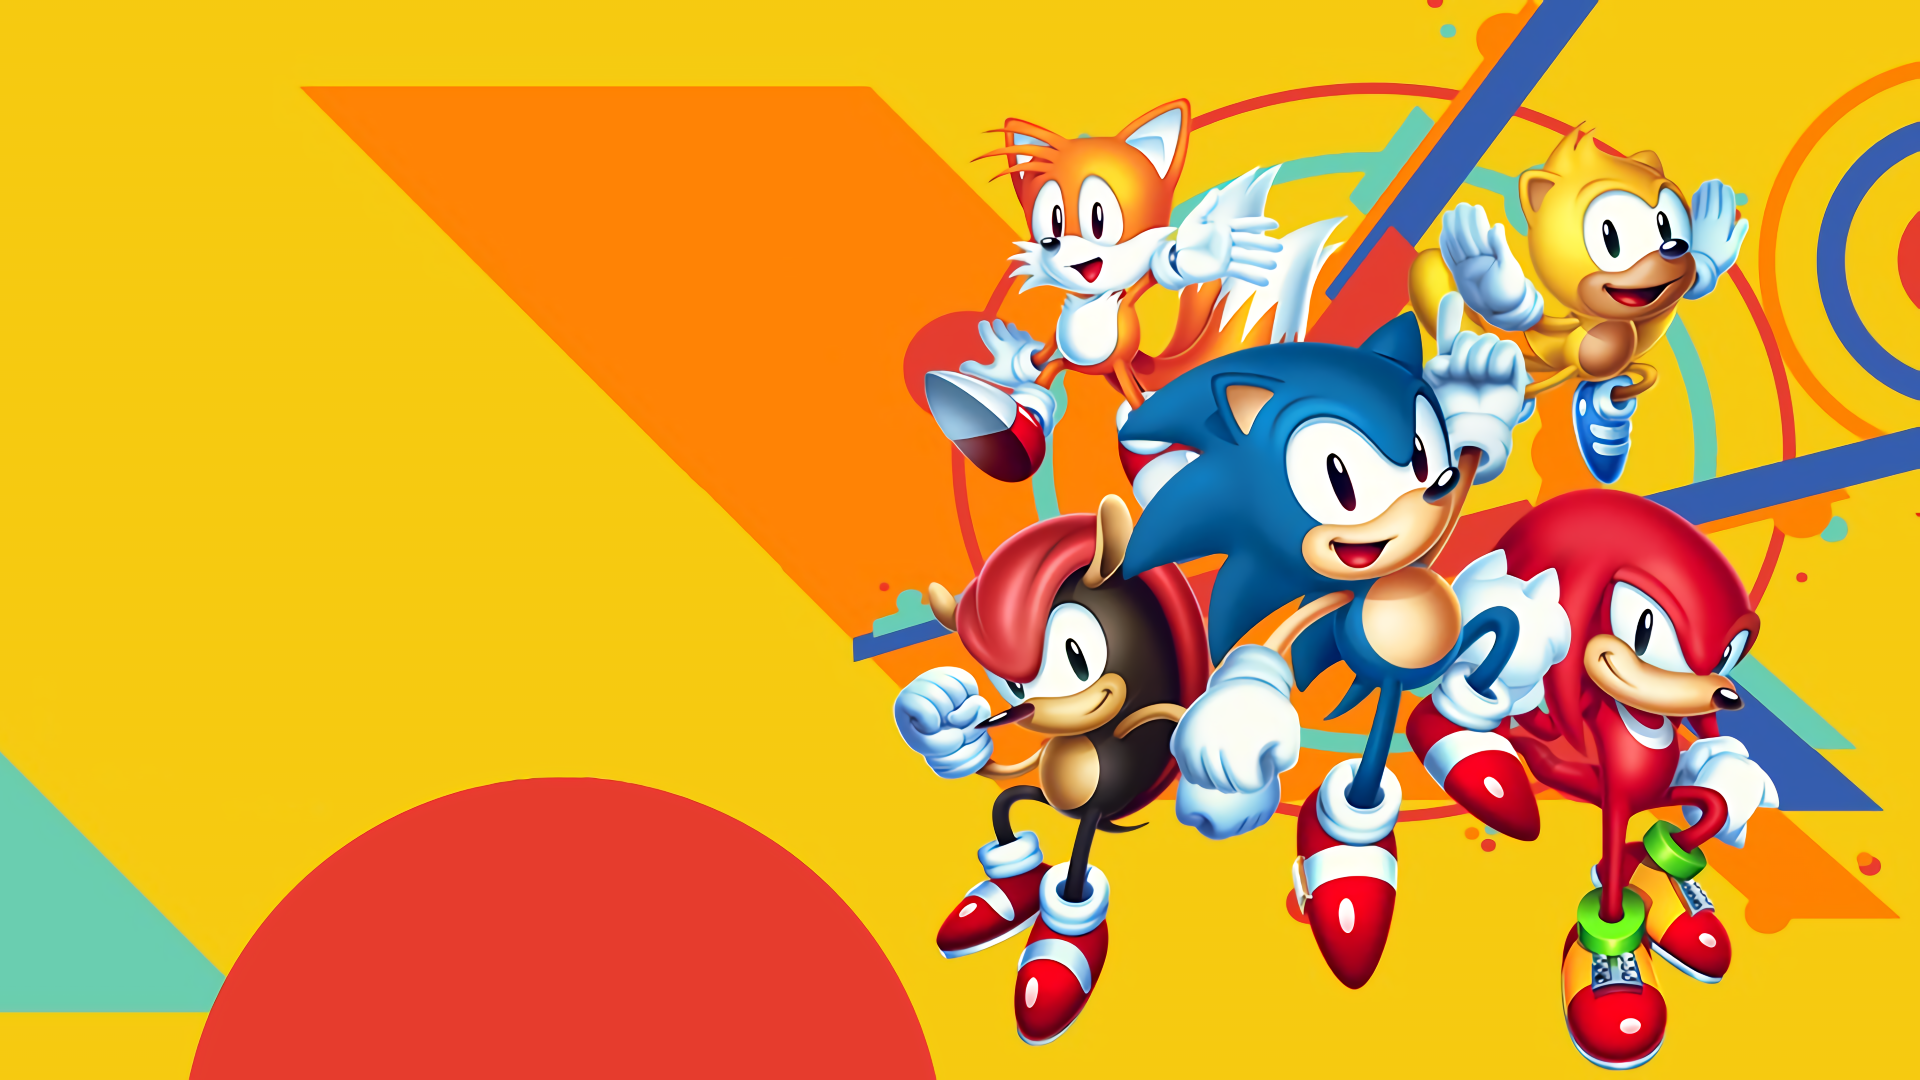 sonic mania video game